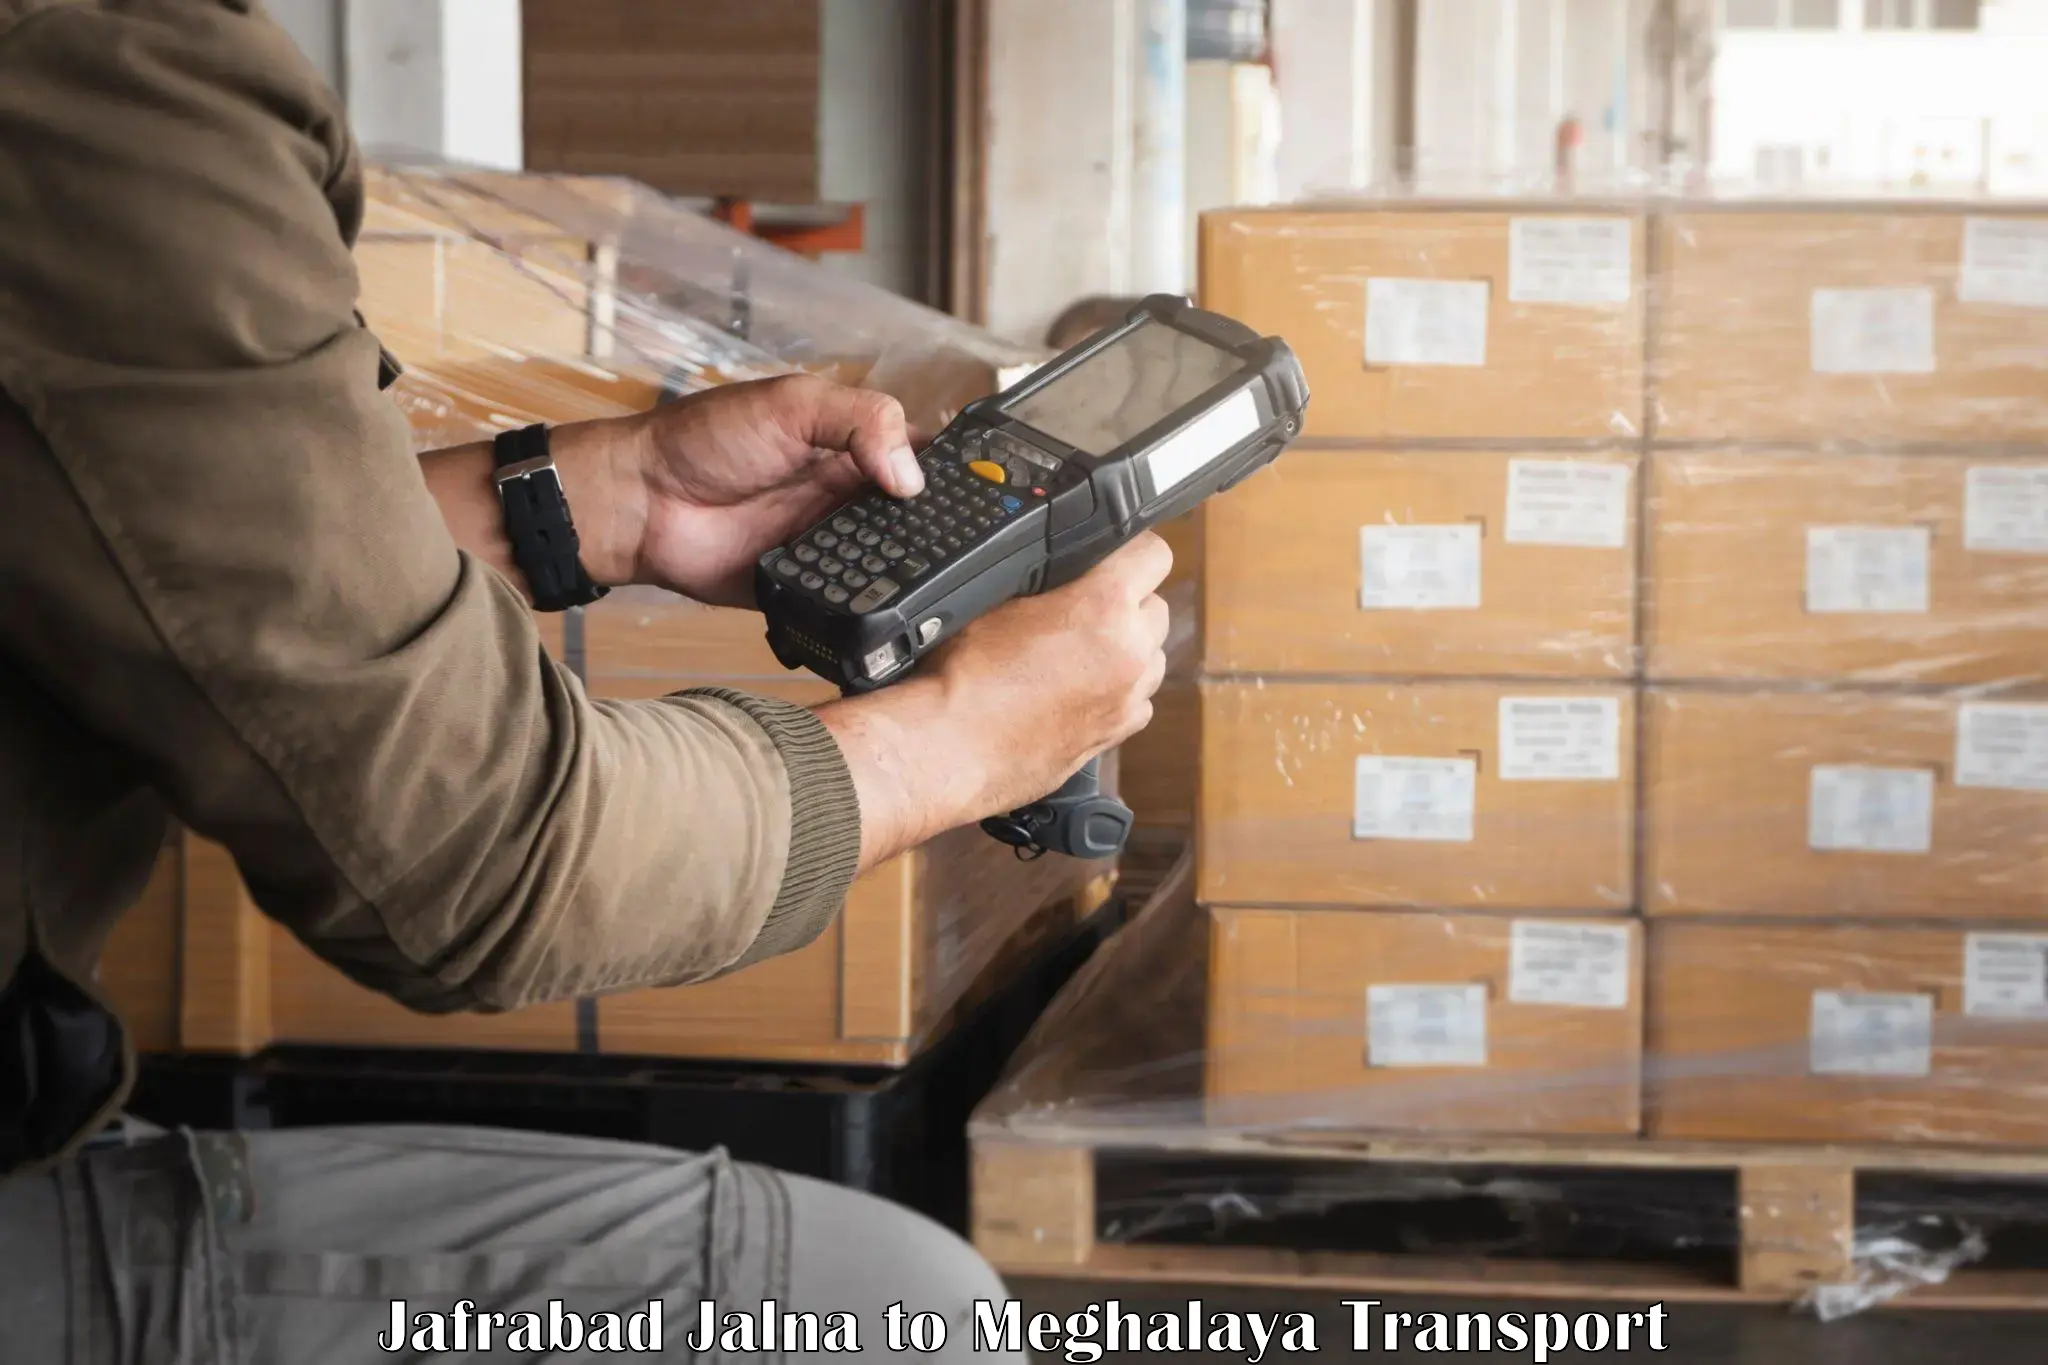 Truck transport companies in India Jafrabad Jalna to Umsaw